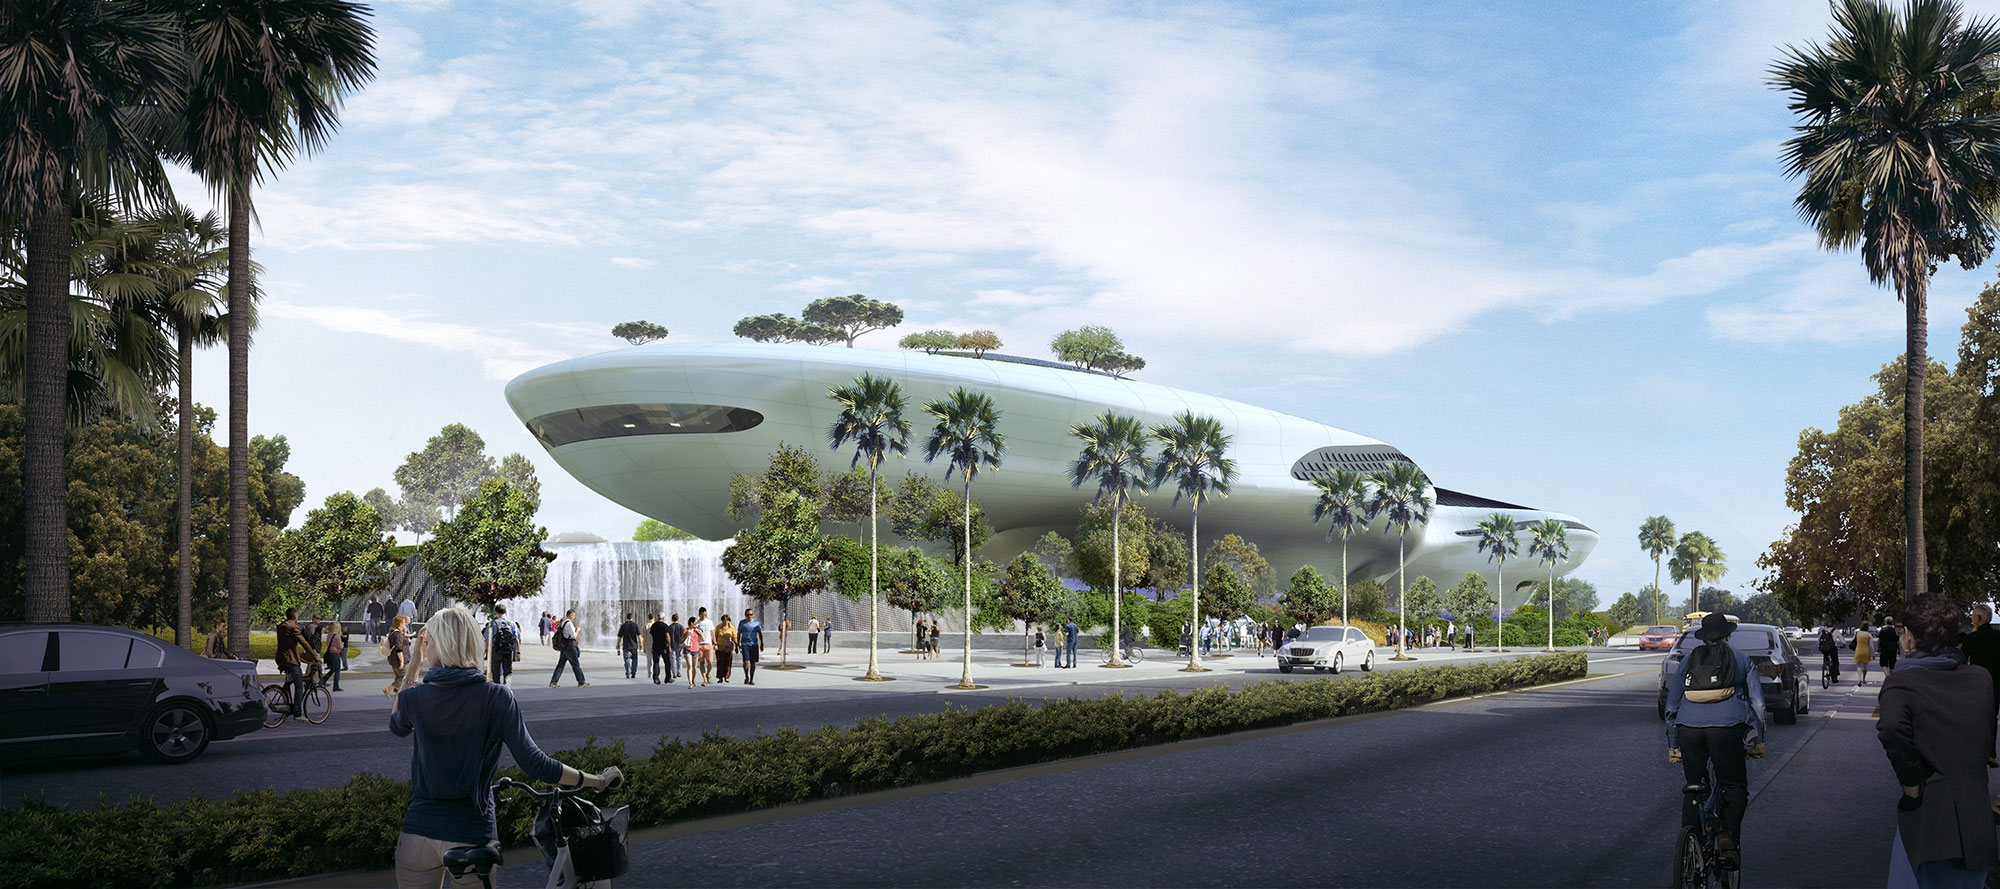 Rendering of the Lucas Museum within Exposition park